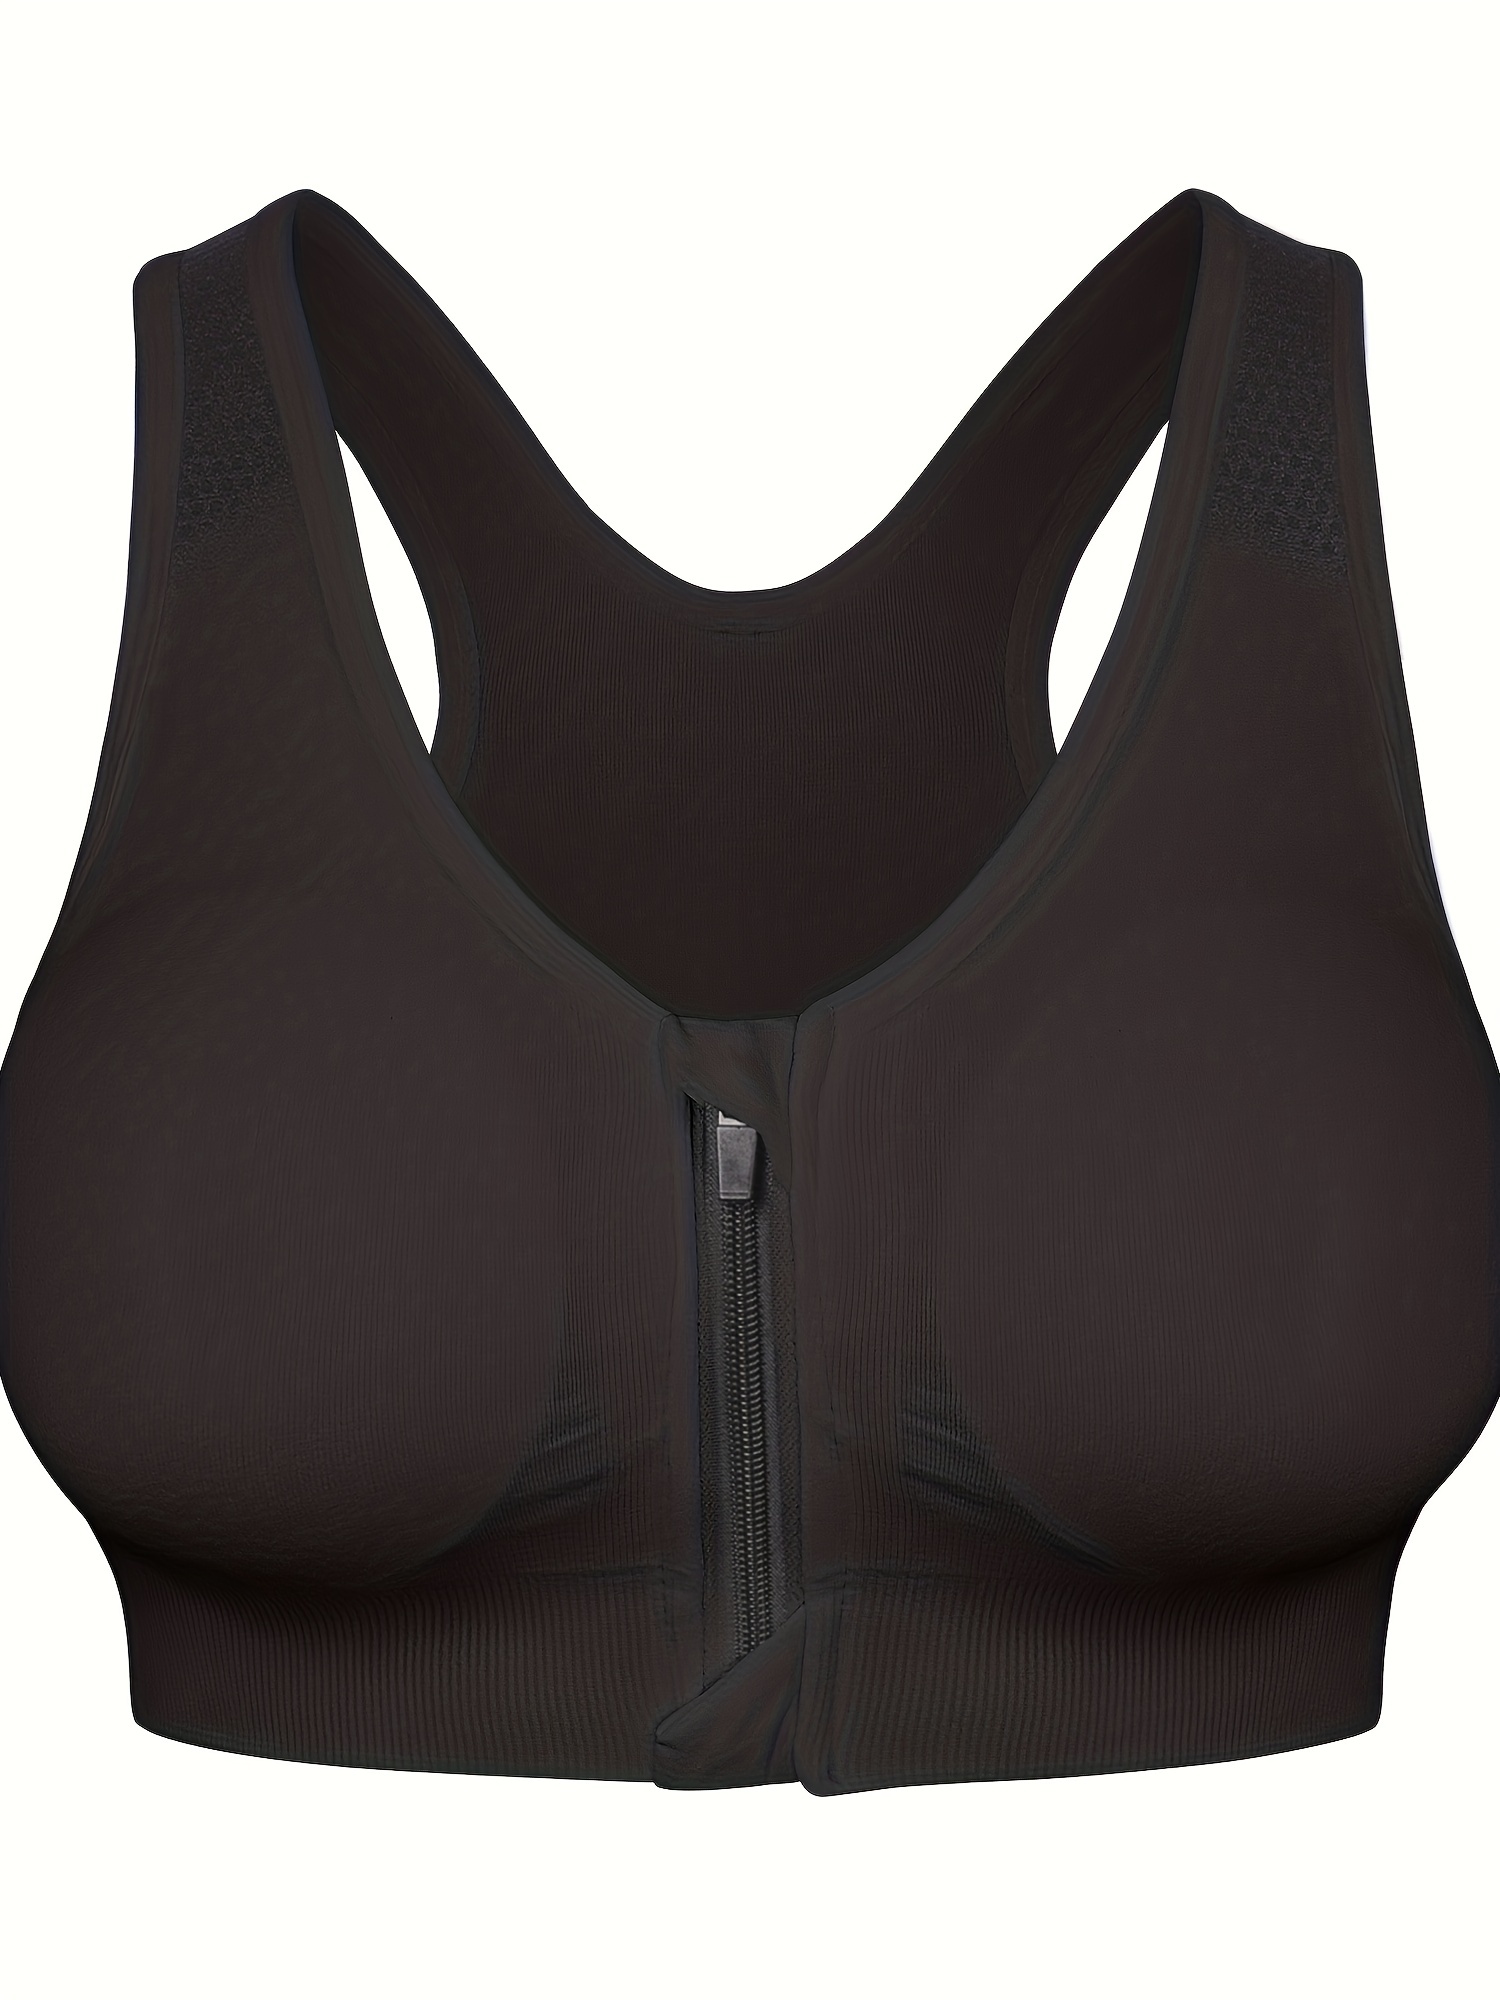 Front Open Padded Zip Bra For Gym Workout Free Size Yoga